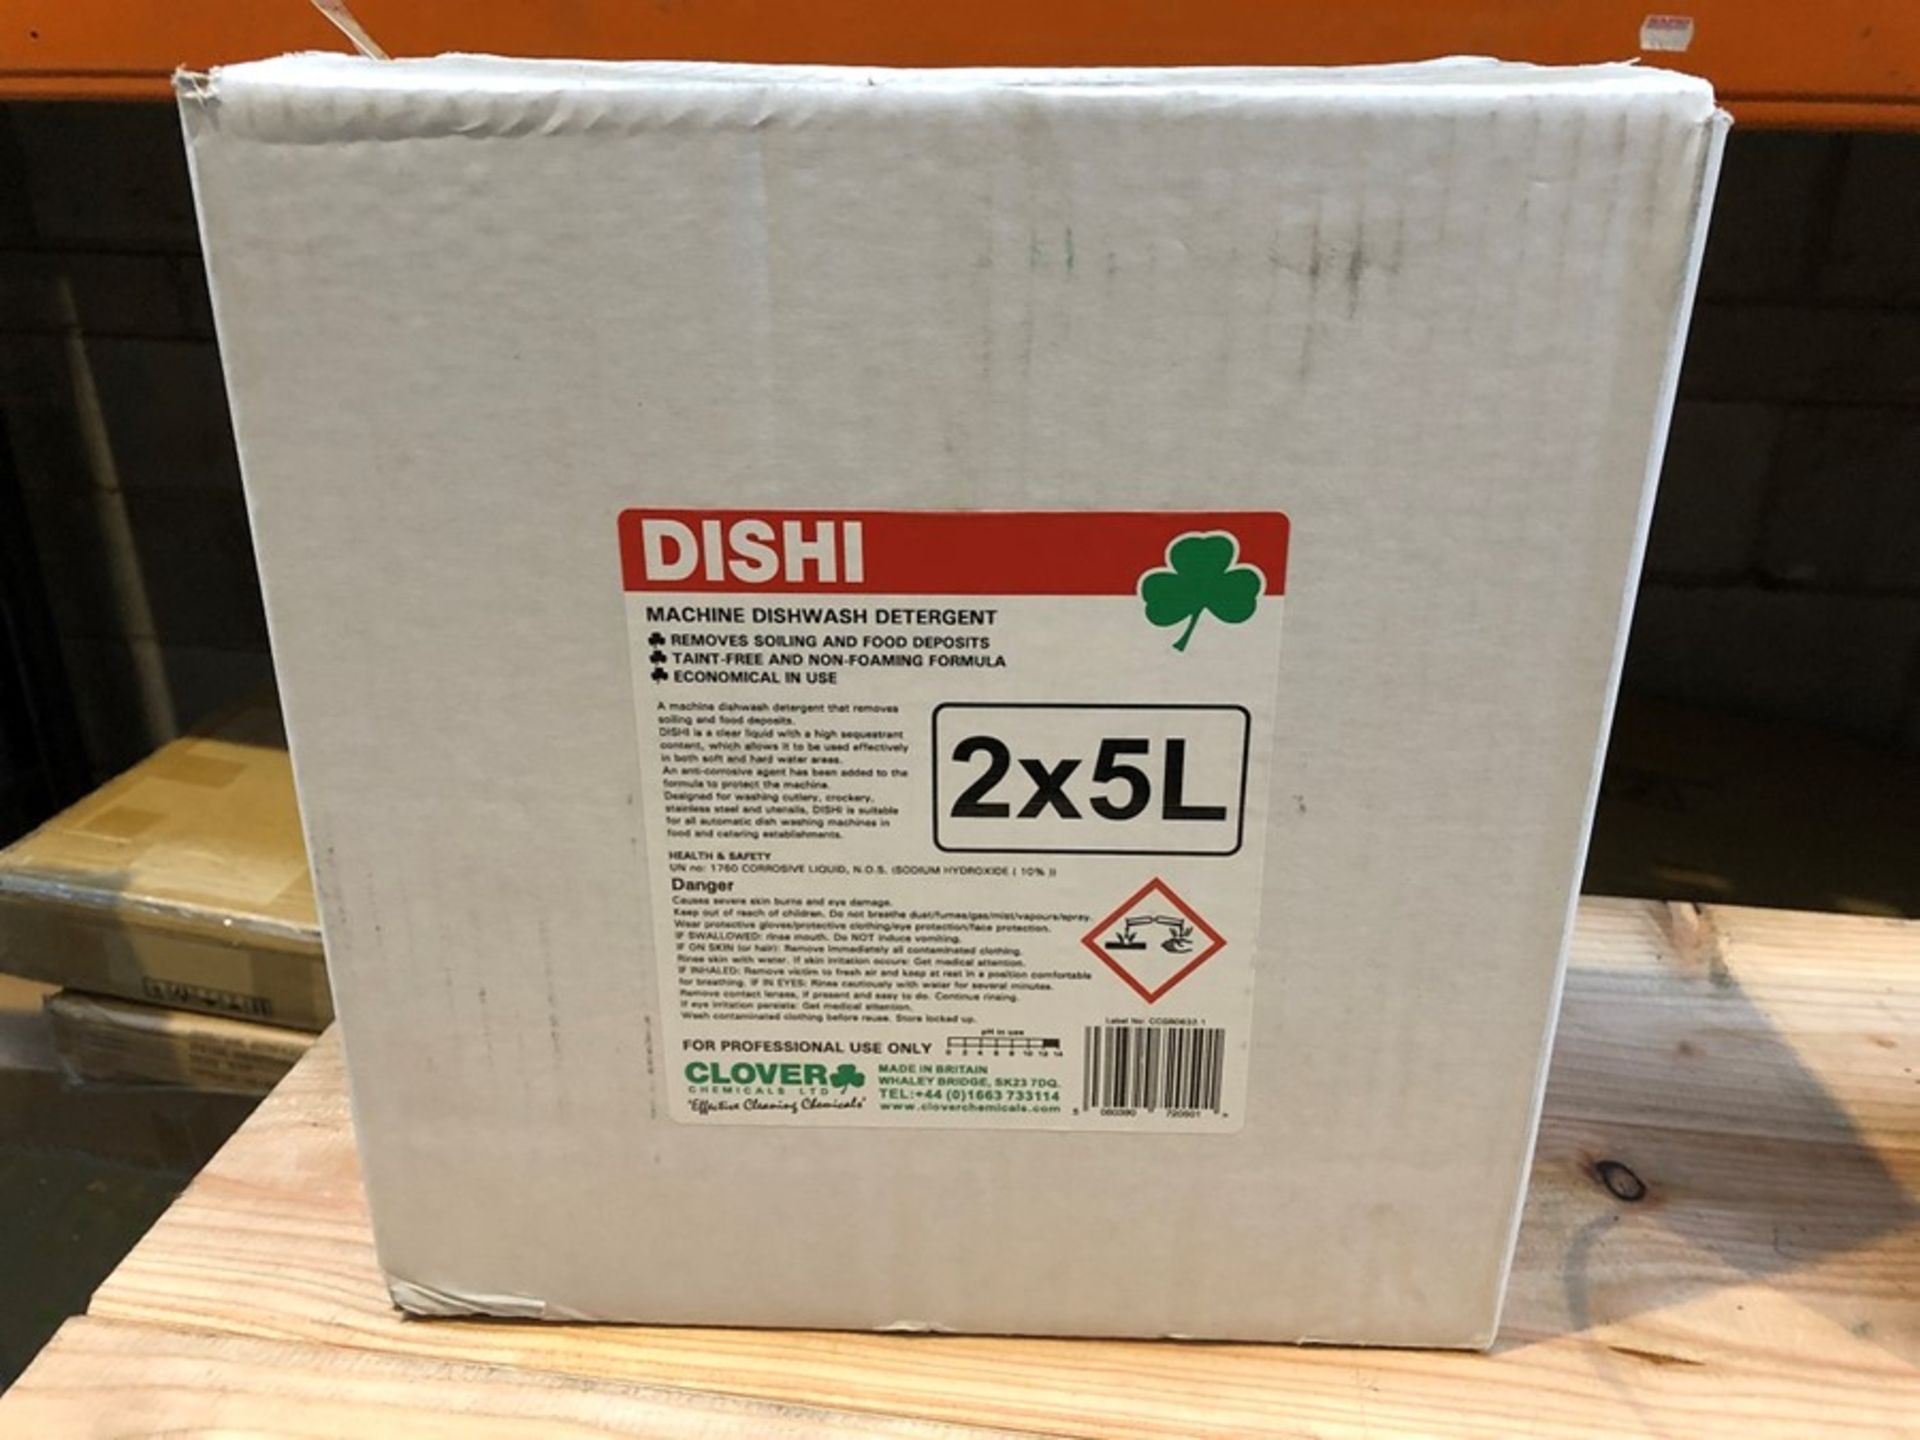 1 BOX TO CONTAIN 2 BOTTLES OF DISHI MACHINE DISHWASH DETERGENT - 2 X 5L (PUBLIC VIEWING AVAILABLE)